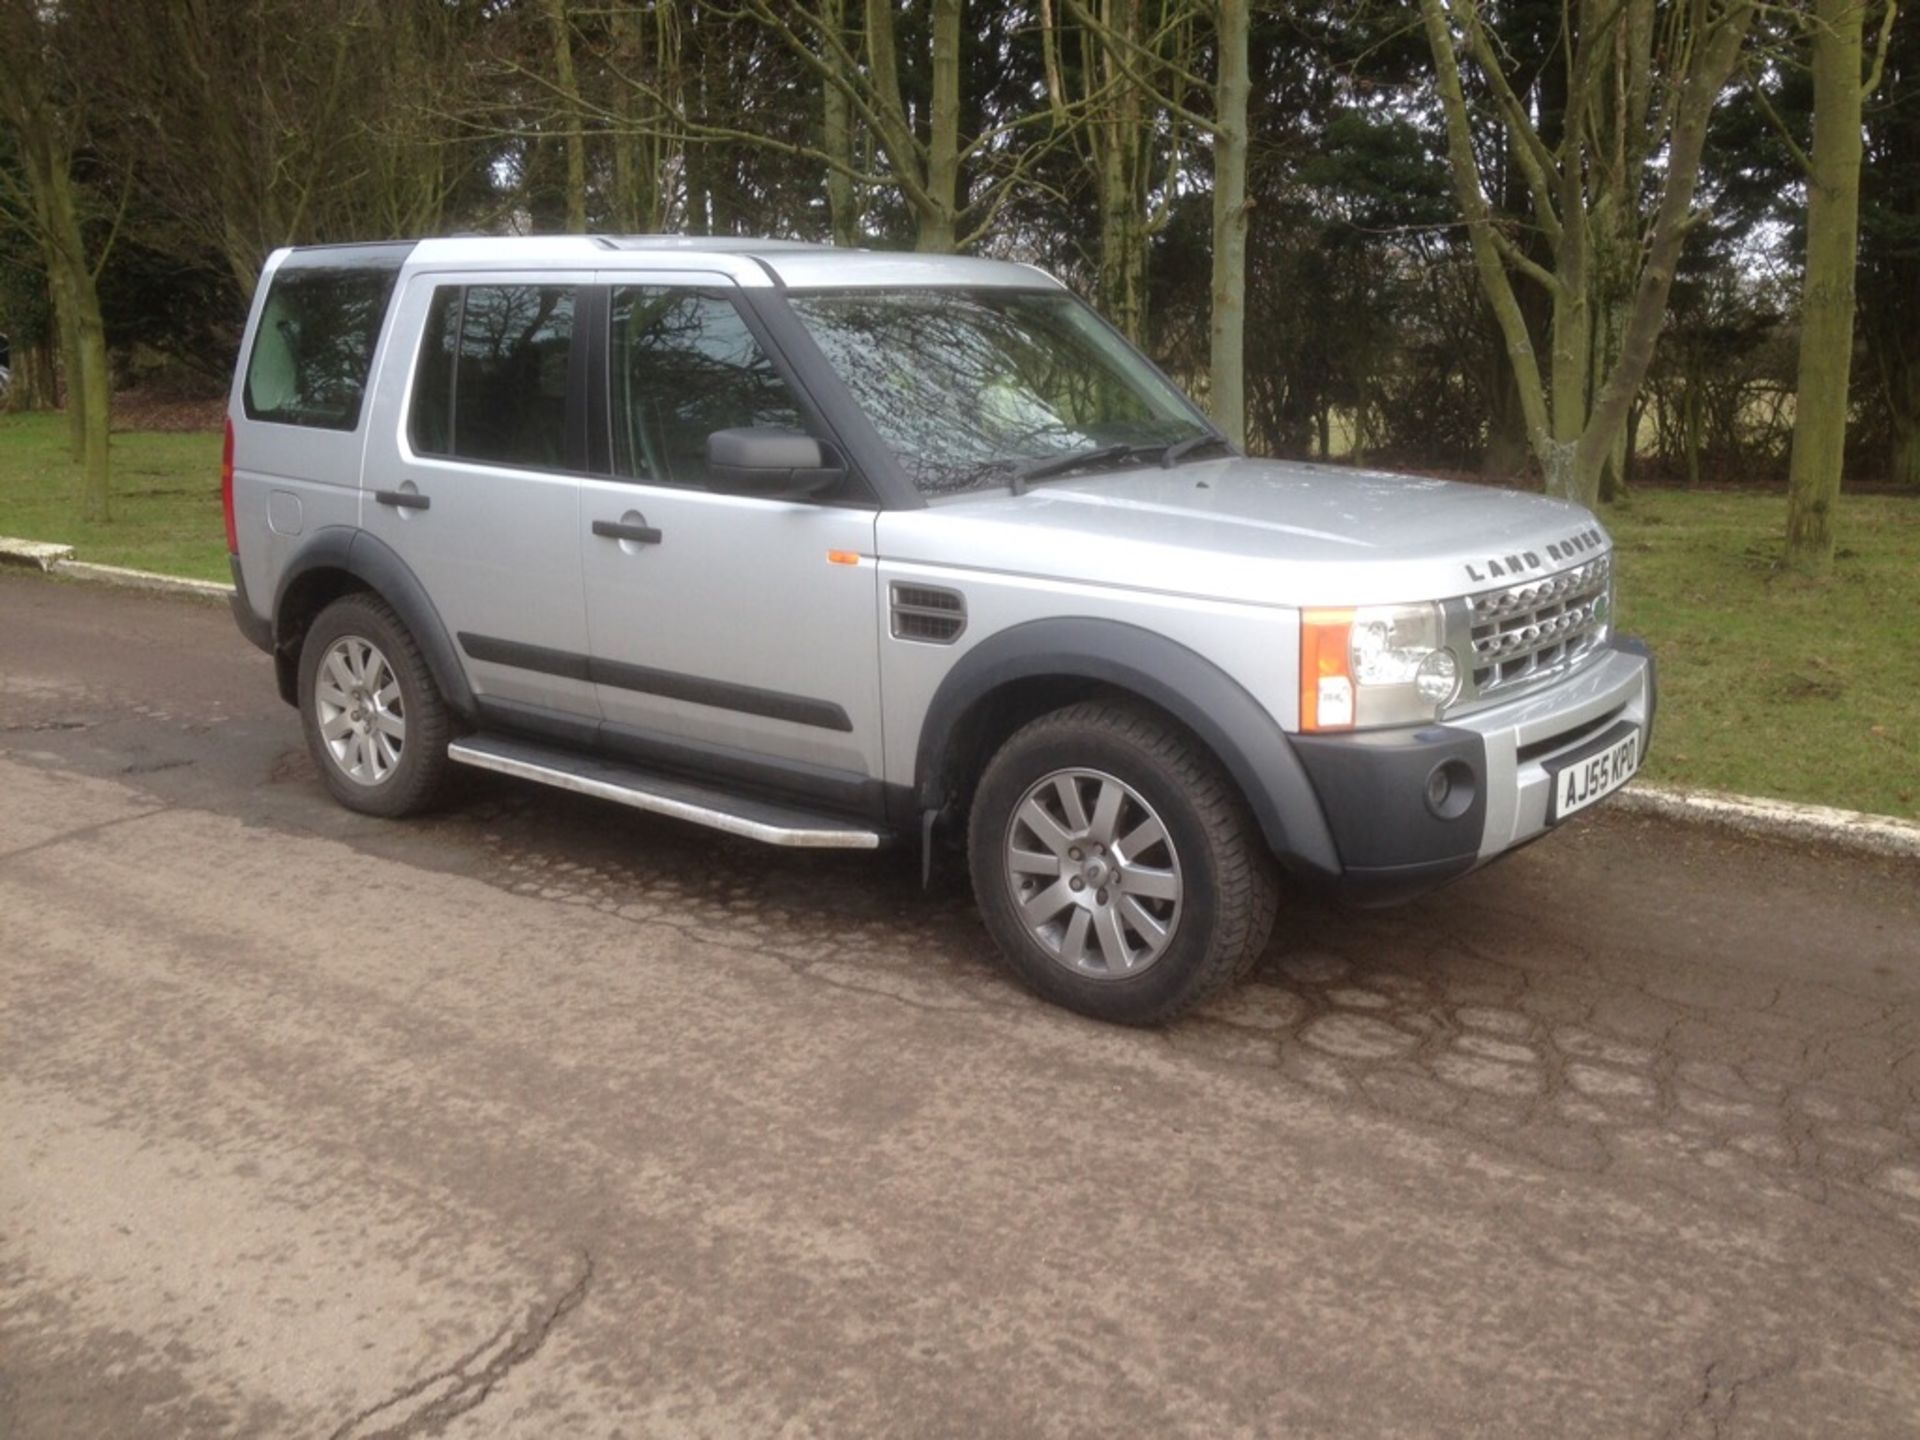 LAND ROVER DISCOVERY 2005 55 REG  V5 PRESENT APPROX 119k     COLLECTION FROM ESSEX - Image 4 of 8